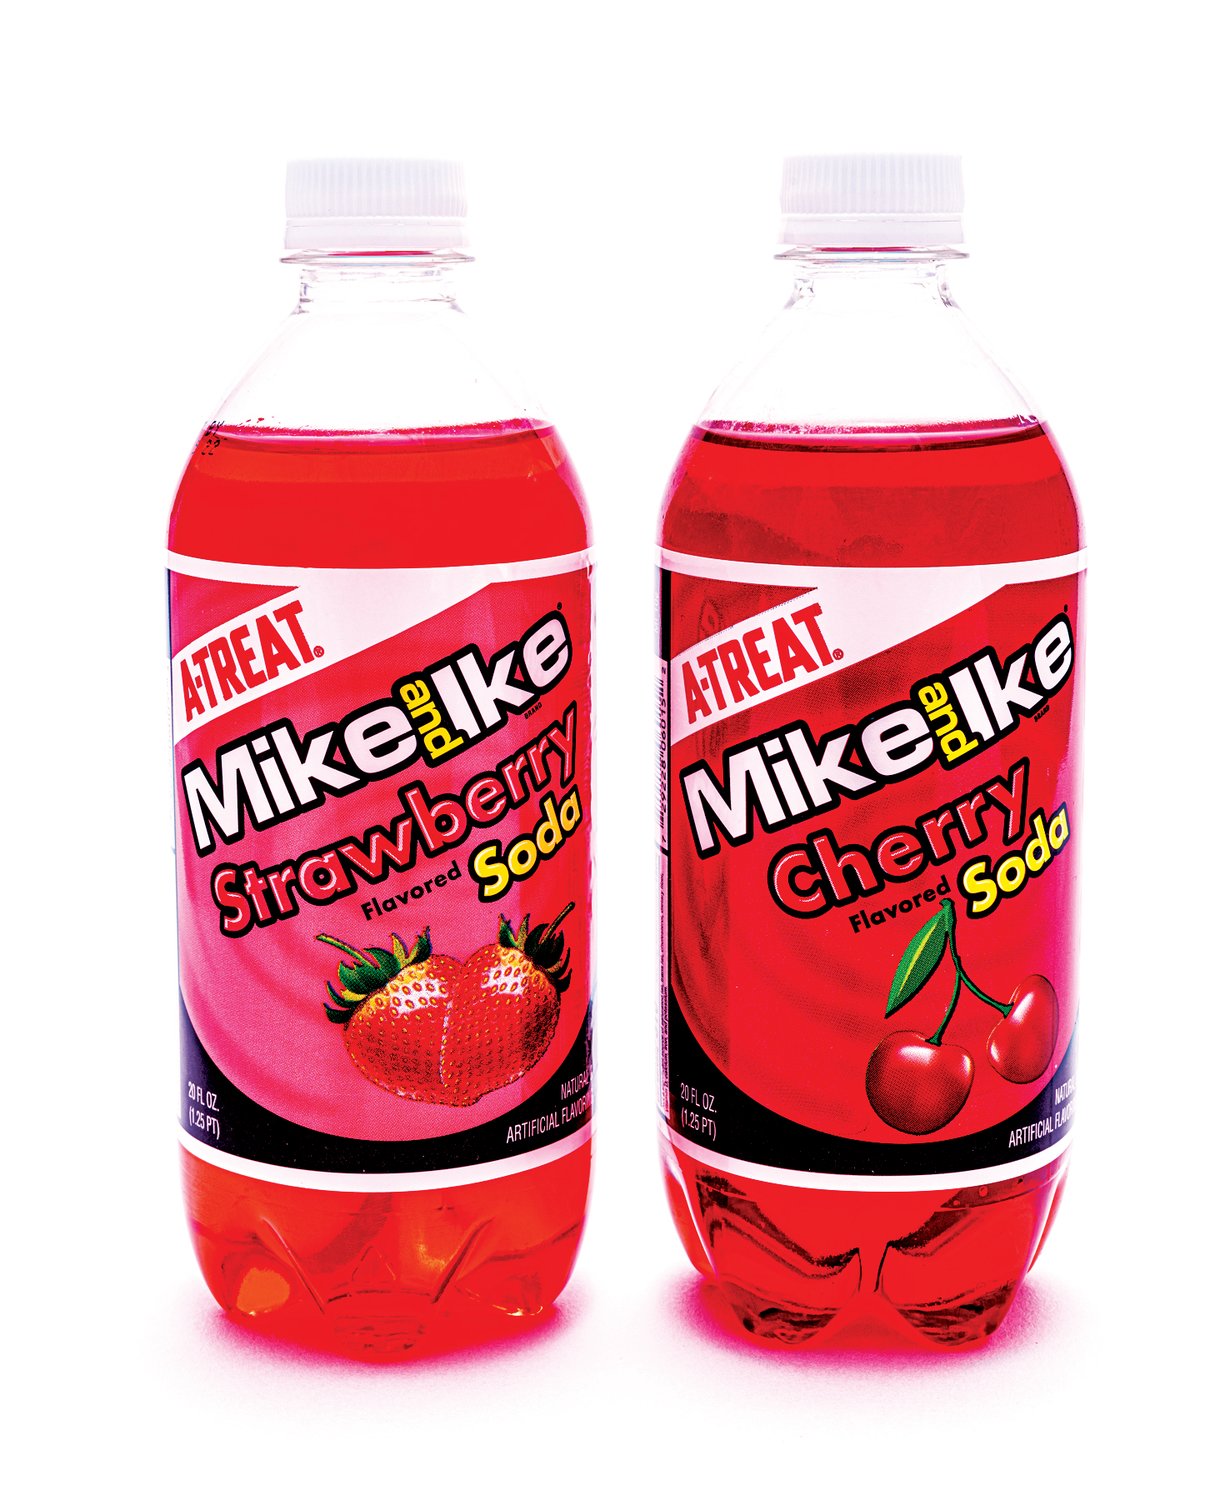 The new A-Treat – Mike and Ike sodas are the result of a partnership between the Jaindl Companies and Just Born Quality Confections.